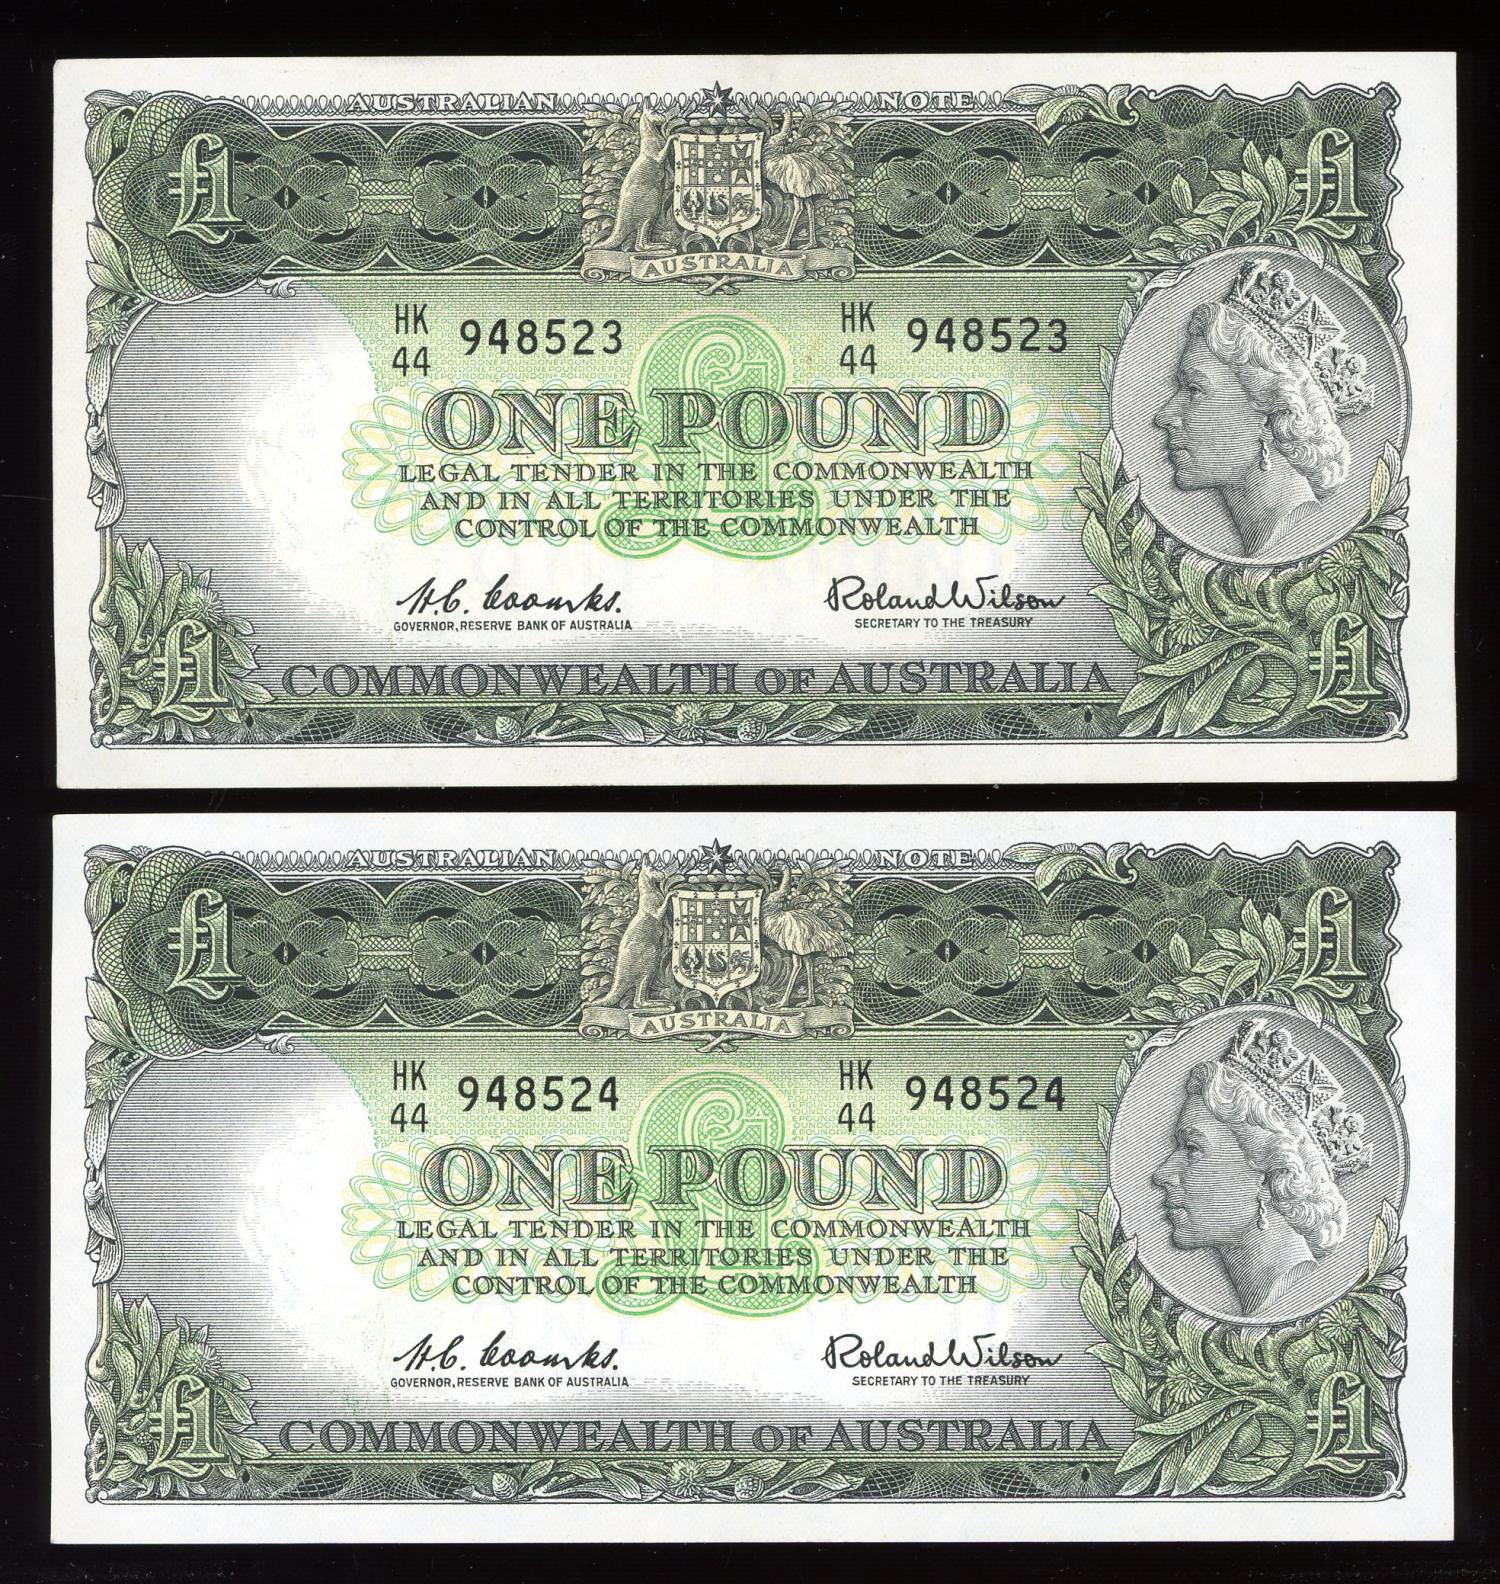 Thumbnail for 1961 Consecutive Pair Coombs-Wilson One Pound Notes HK44 948523-24 EF